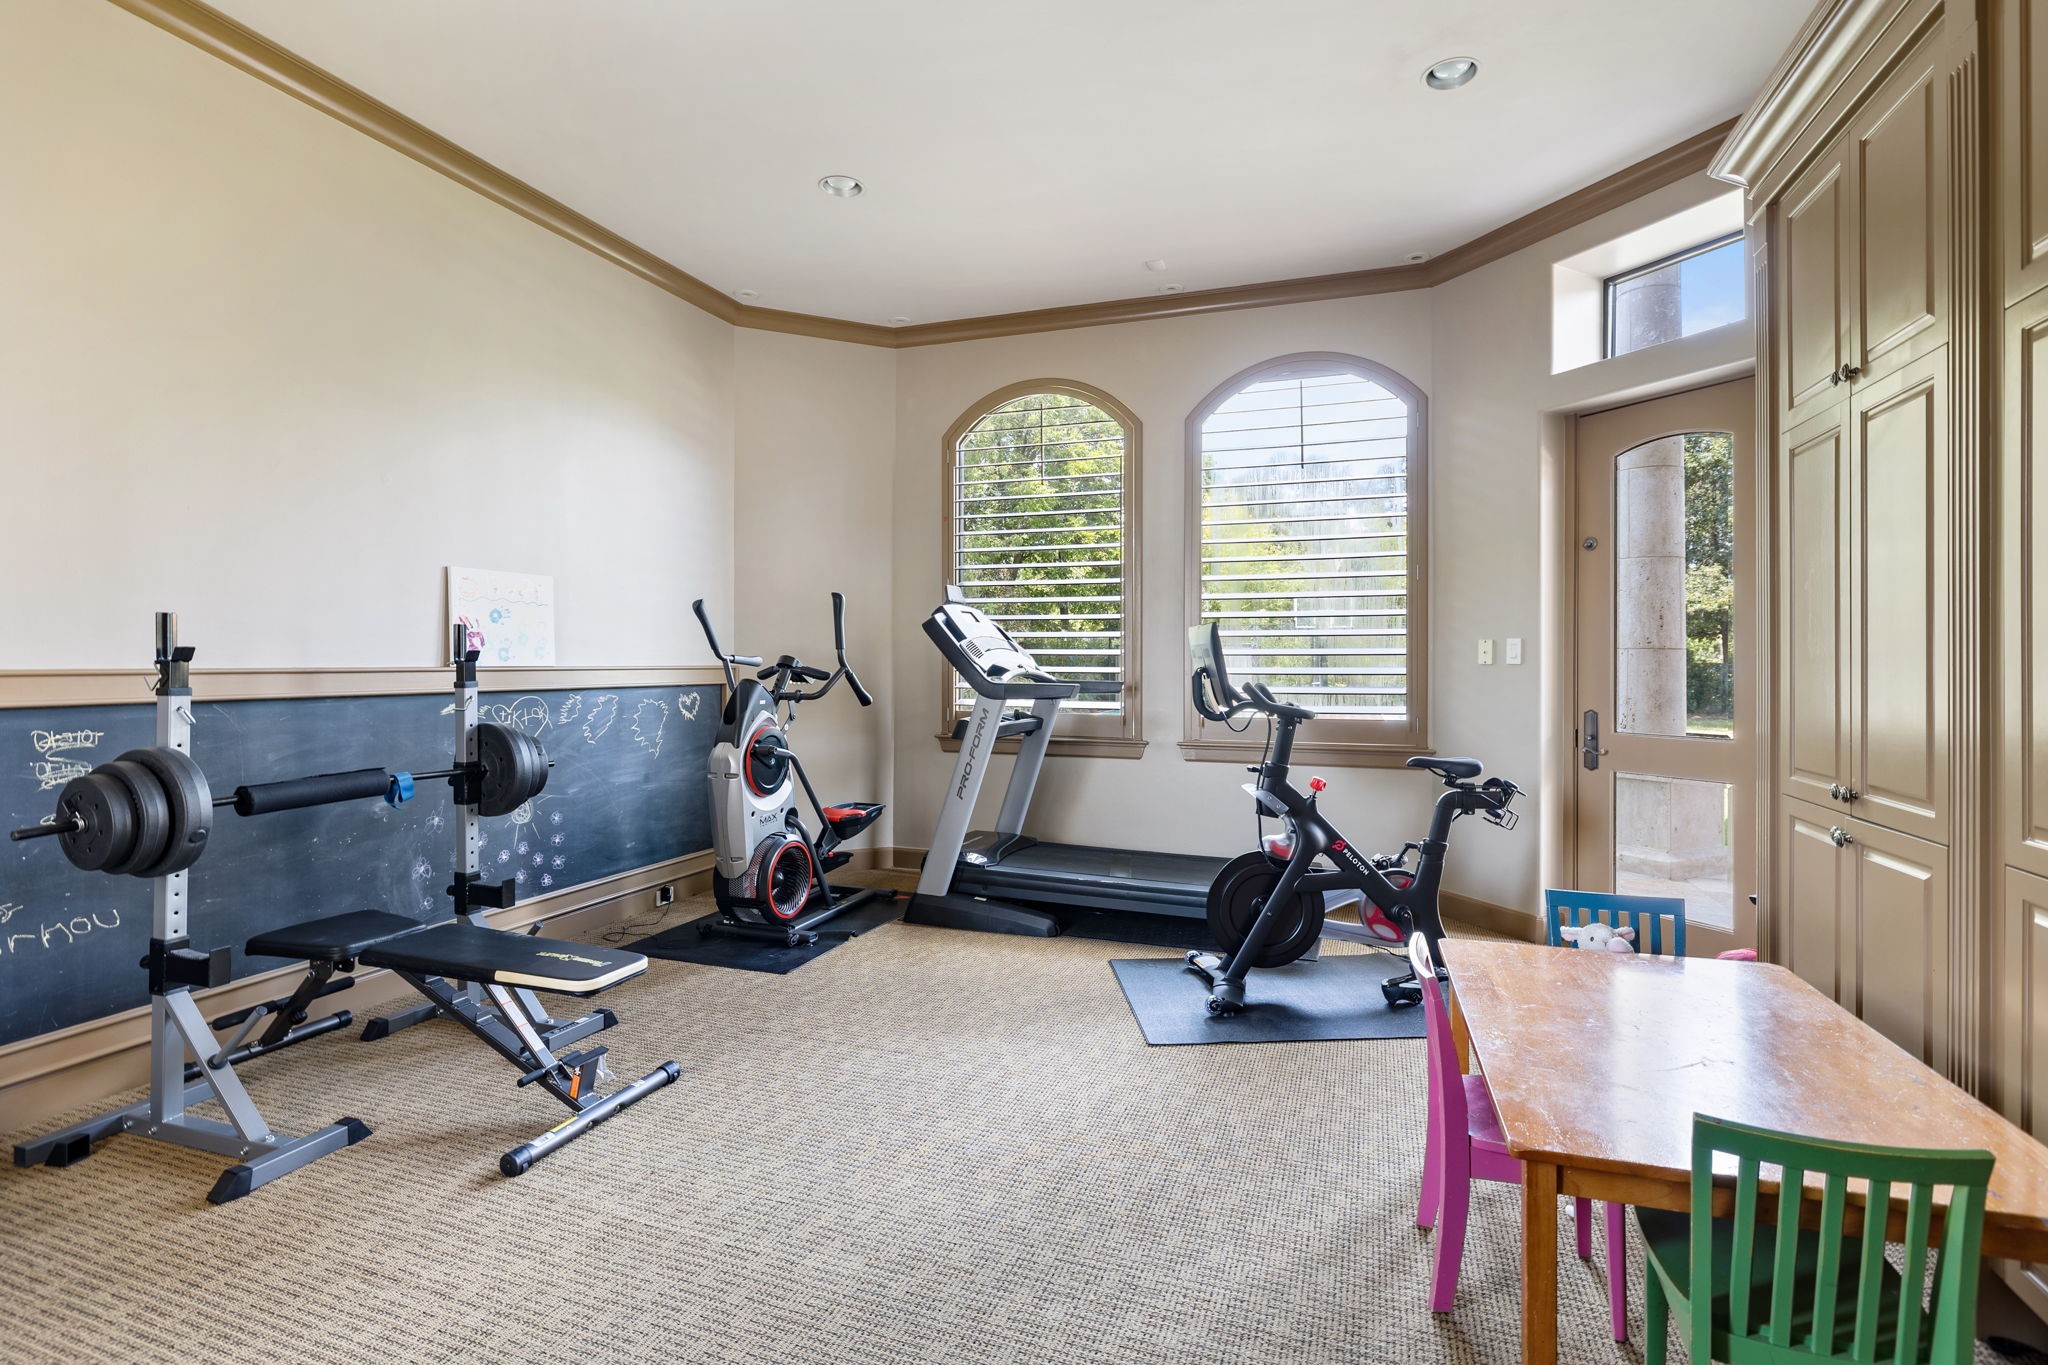 Completing the First Floor is an Exercise Room with an ensuite Bathroom and walk-in Closet. Once you have gotten buff enough, the door leads to the Pool for basking or lapping. An en-suite Bath can also function as your Pool Bath. The Exercise Room may be adapted as an additional Secondary Bedroom